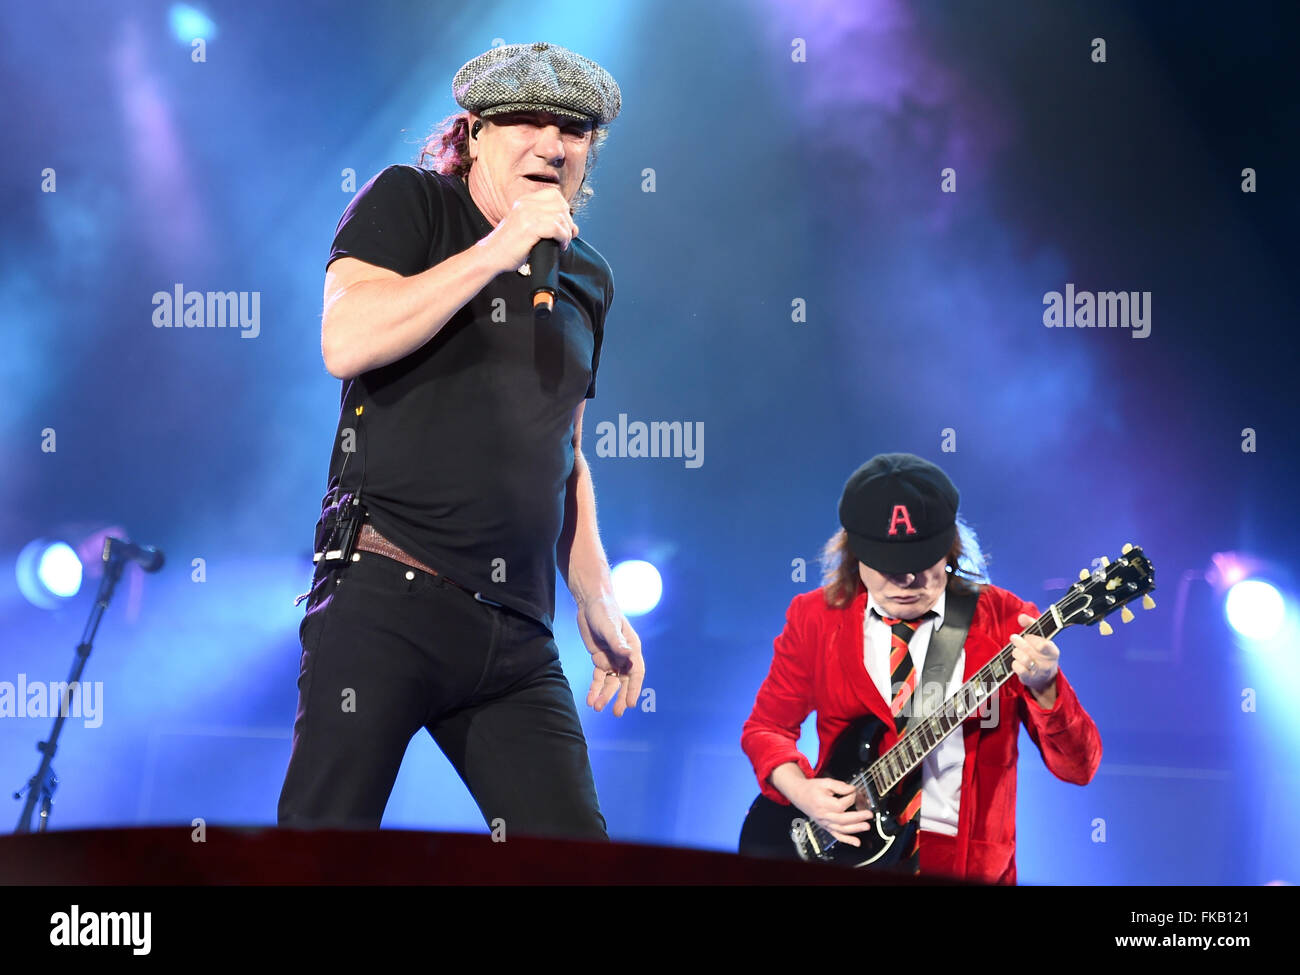 Berlin, Germany. 25th June, 2015. Singer Brian Johnson (L) and guitarist Angus Young of Australian rock band AC/DC perform on stage during a concert at the Olympiastadion in Berlin, Germany, 25 June 2015. Photo: Britta Pedersen/dpa/Alamy Live News Stock Photo